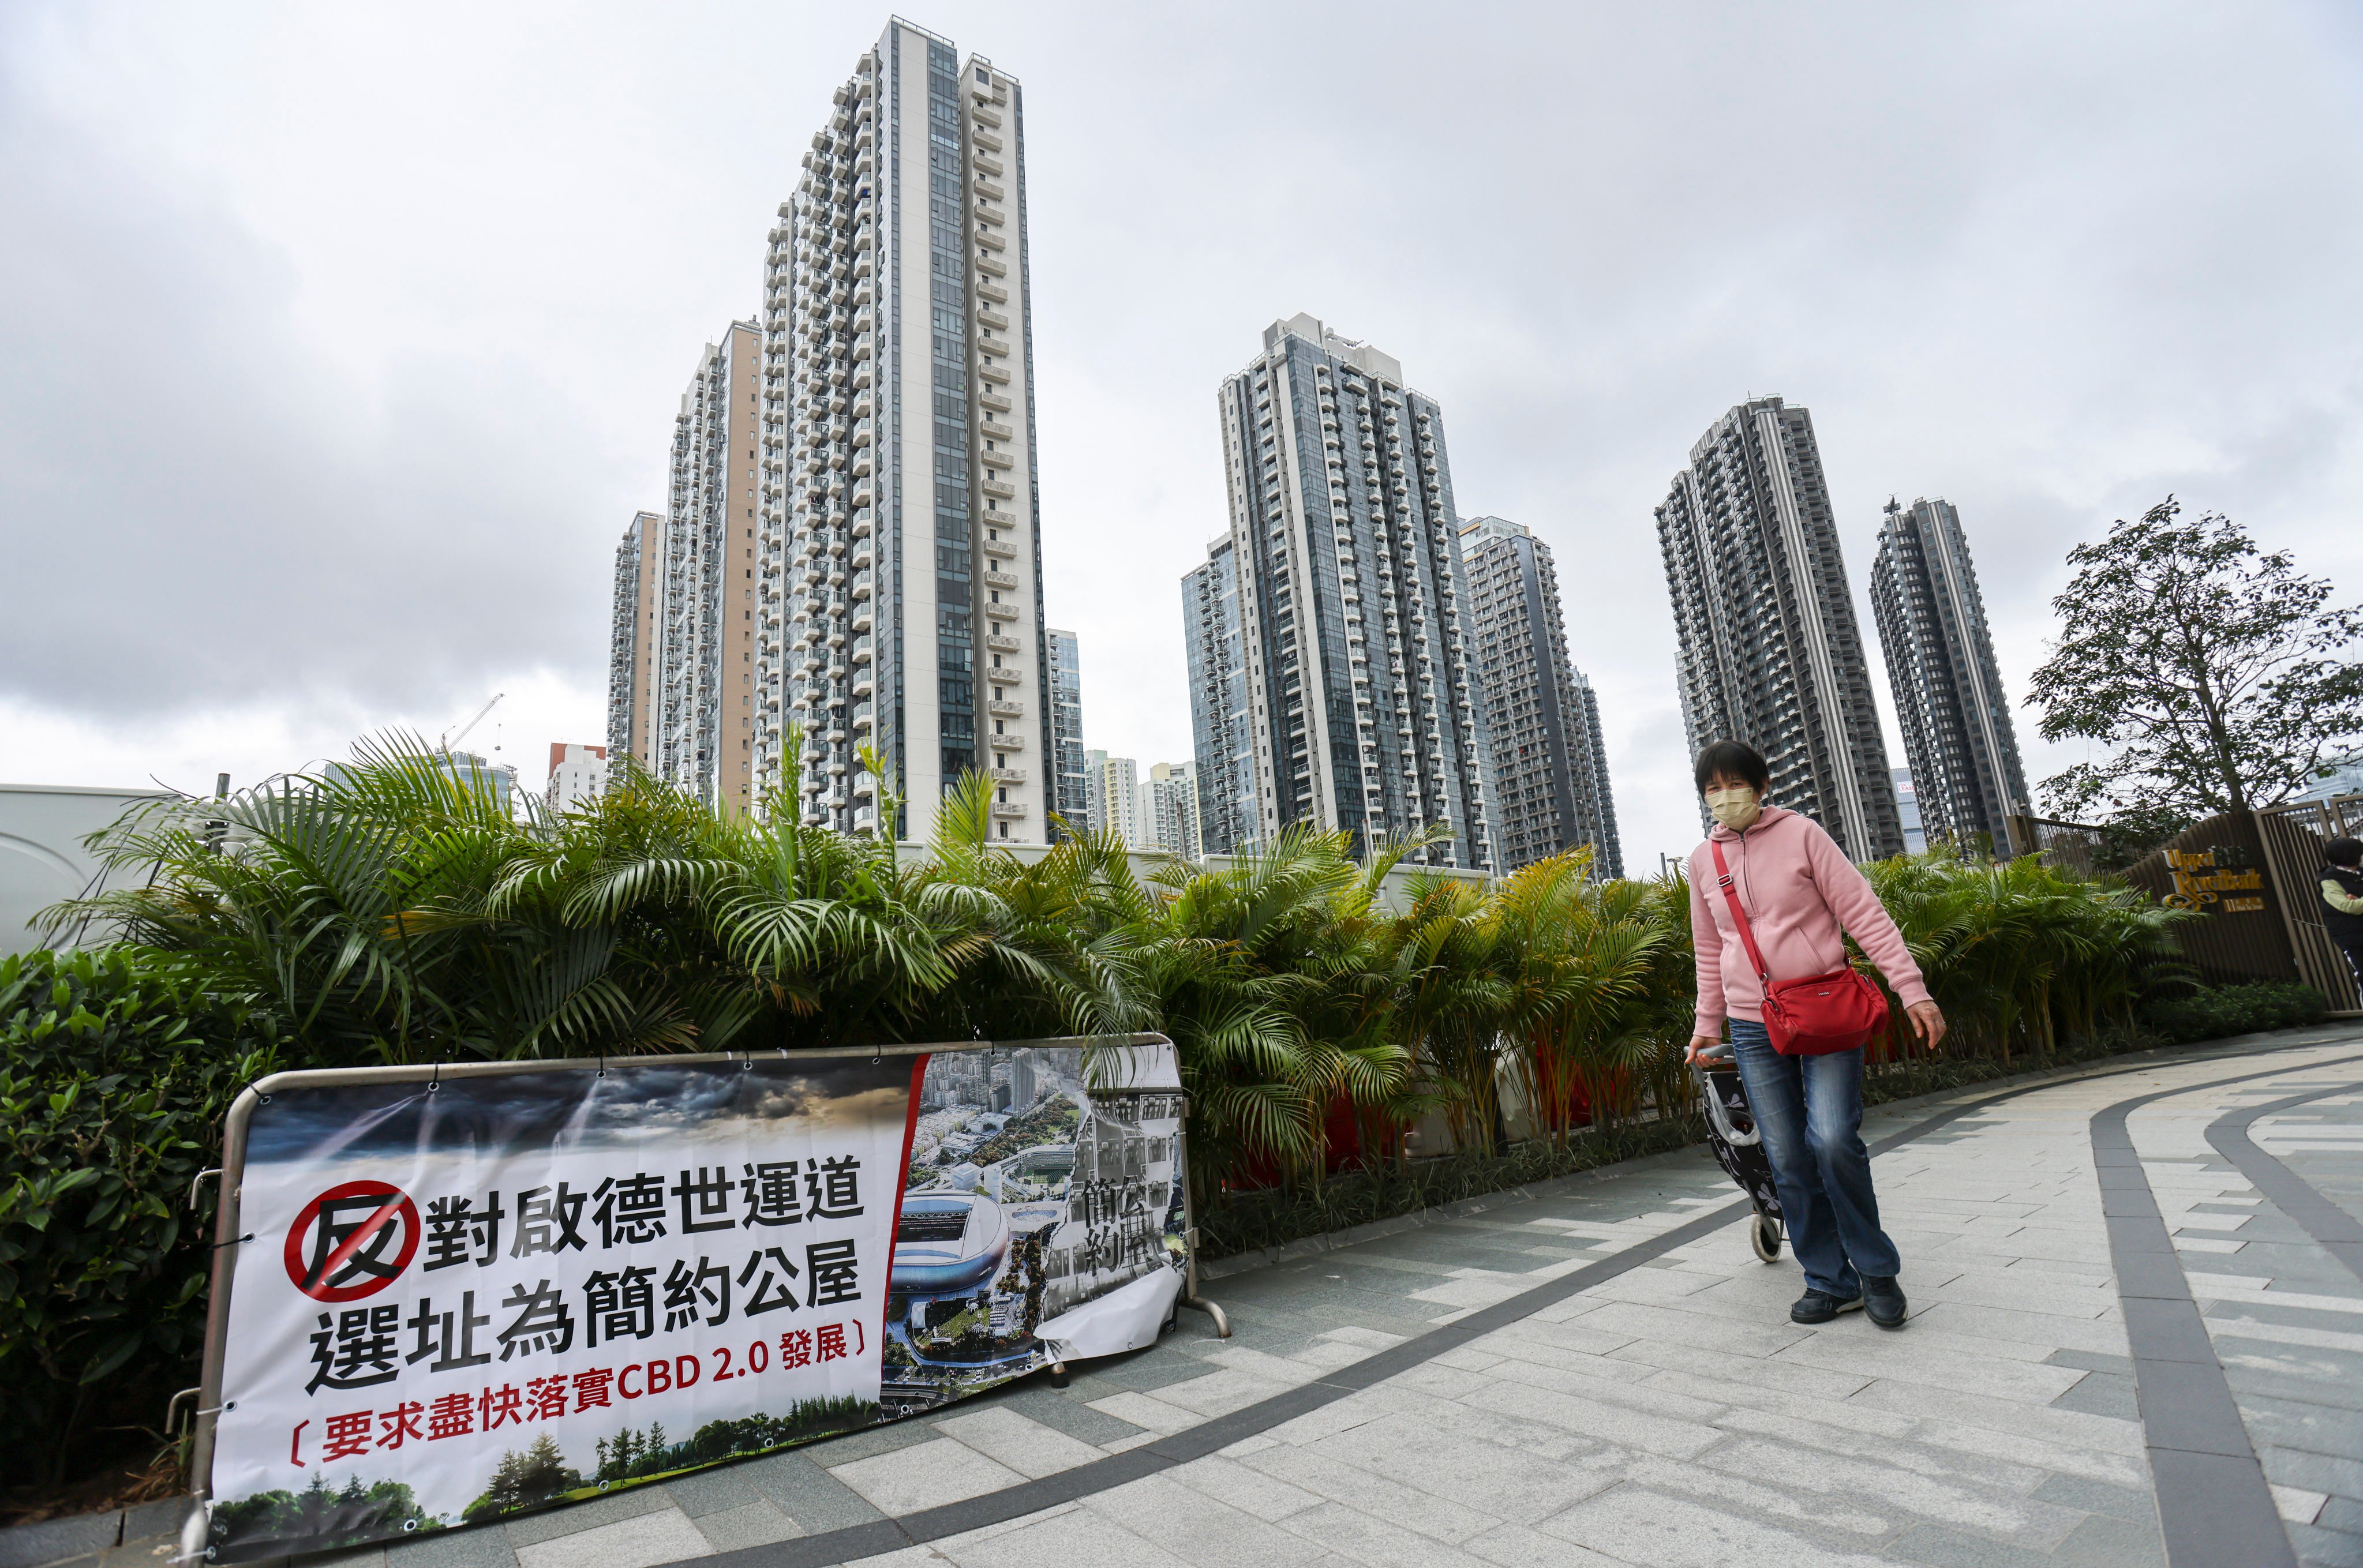 People walk past a banner protesting against the government plan to build “light public housing” near a middle-class neighbourhood in Kai Tak’s new development area, in Kowloon, Hong Kong on February 8. Photo: May Tse